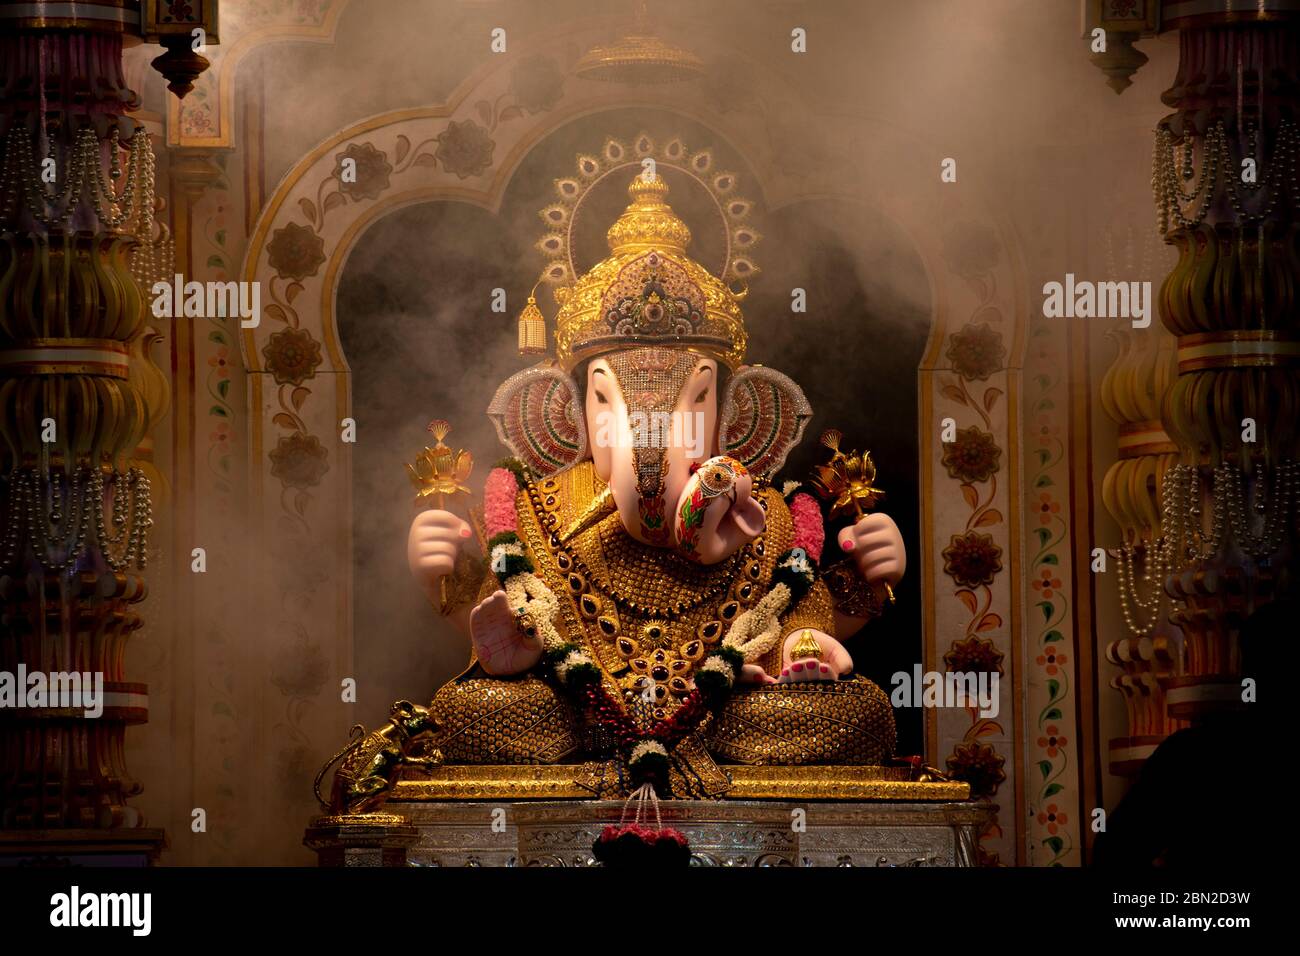 Dagdusheth Ganapati Idol at pune with golden jewellery in the